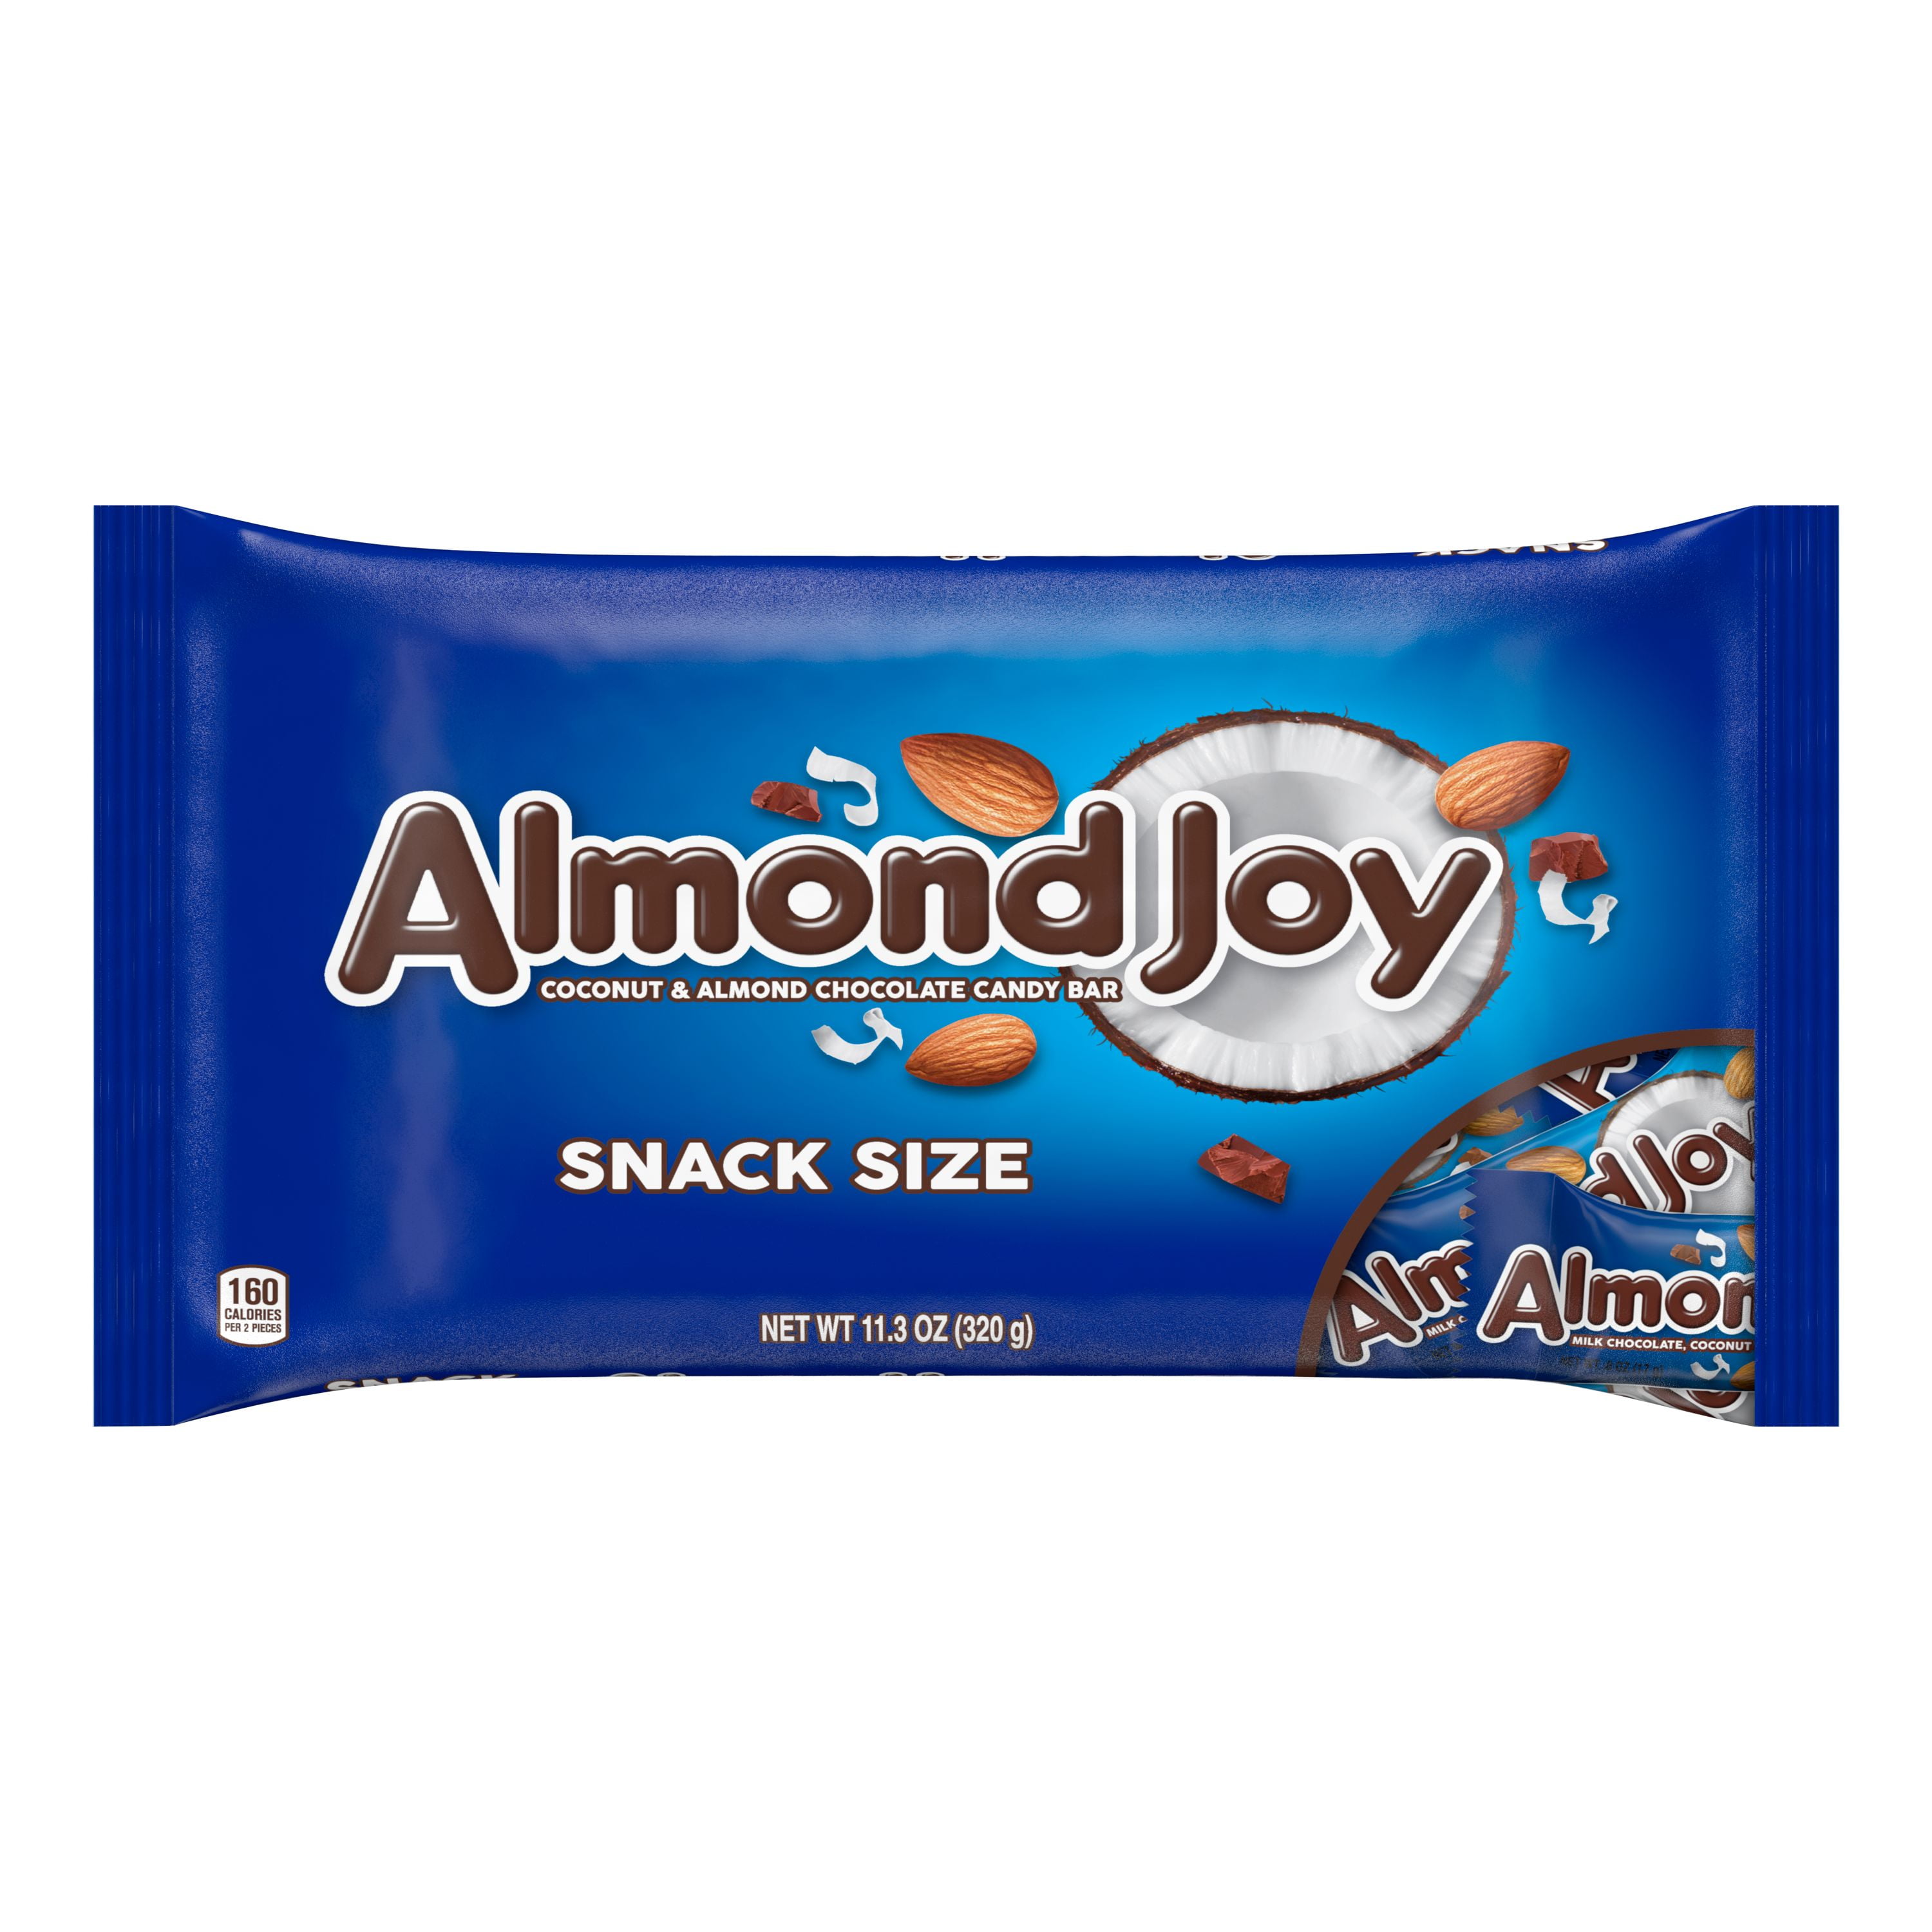 Almond Joy Coconut And Almond Chocolate Snack Size Candy Bars